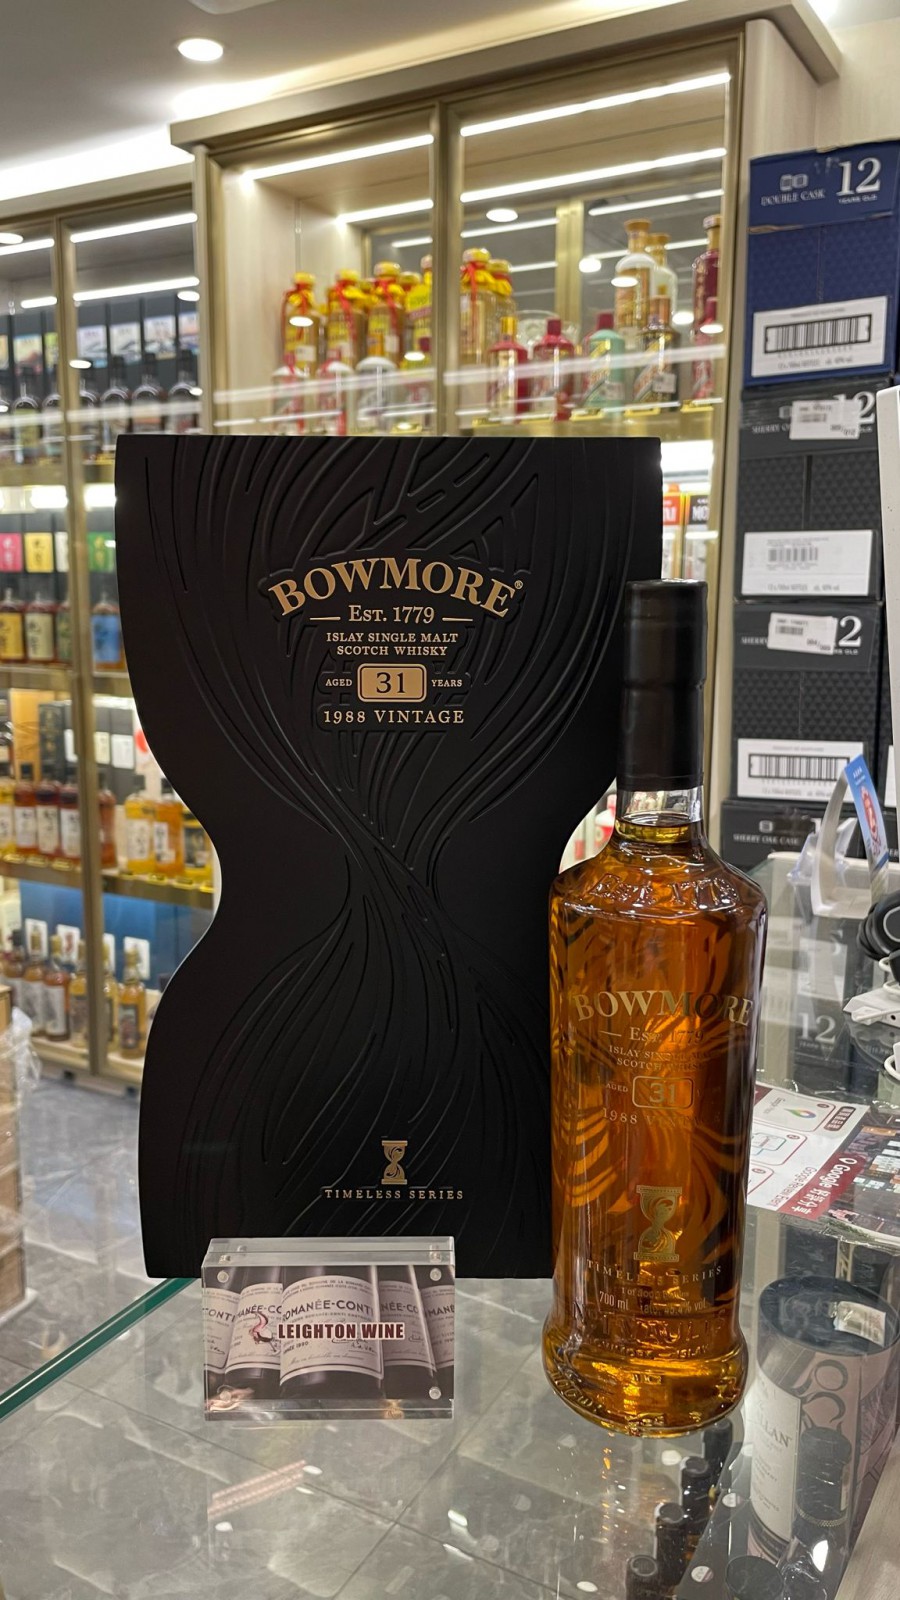 Bowmore - Timeless Series 31 Years 1988